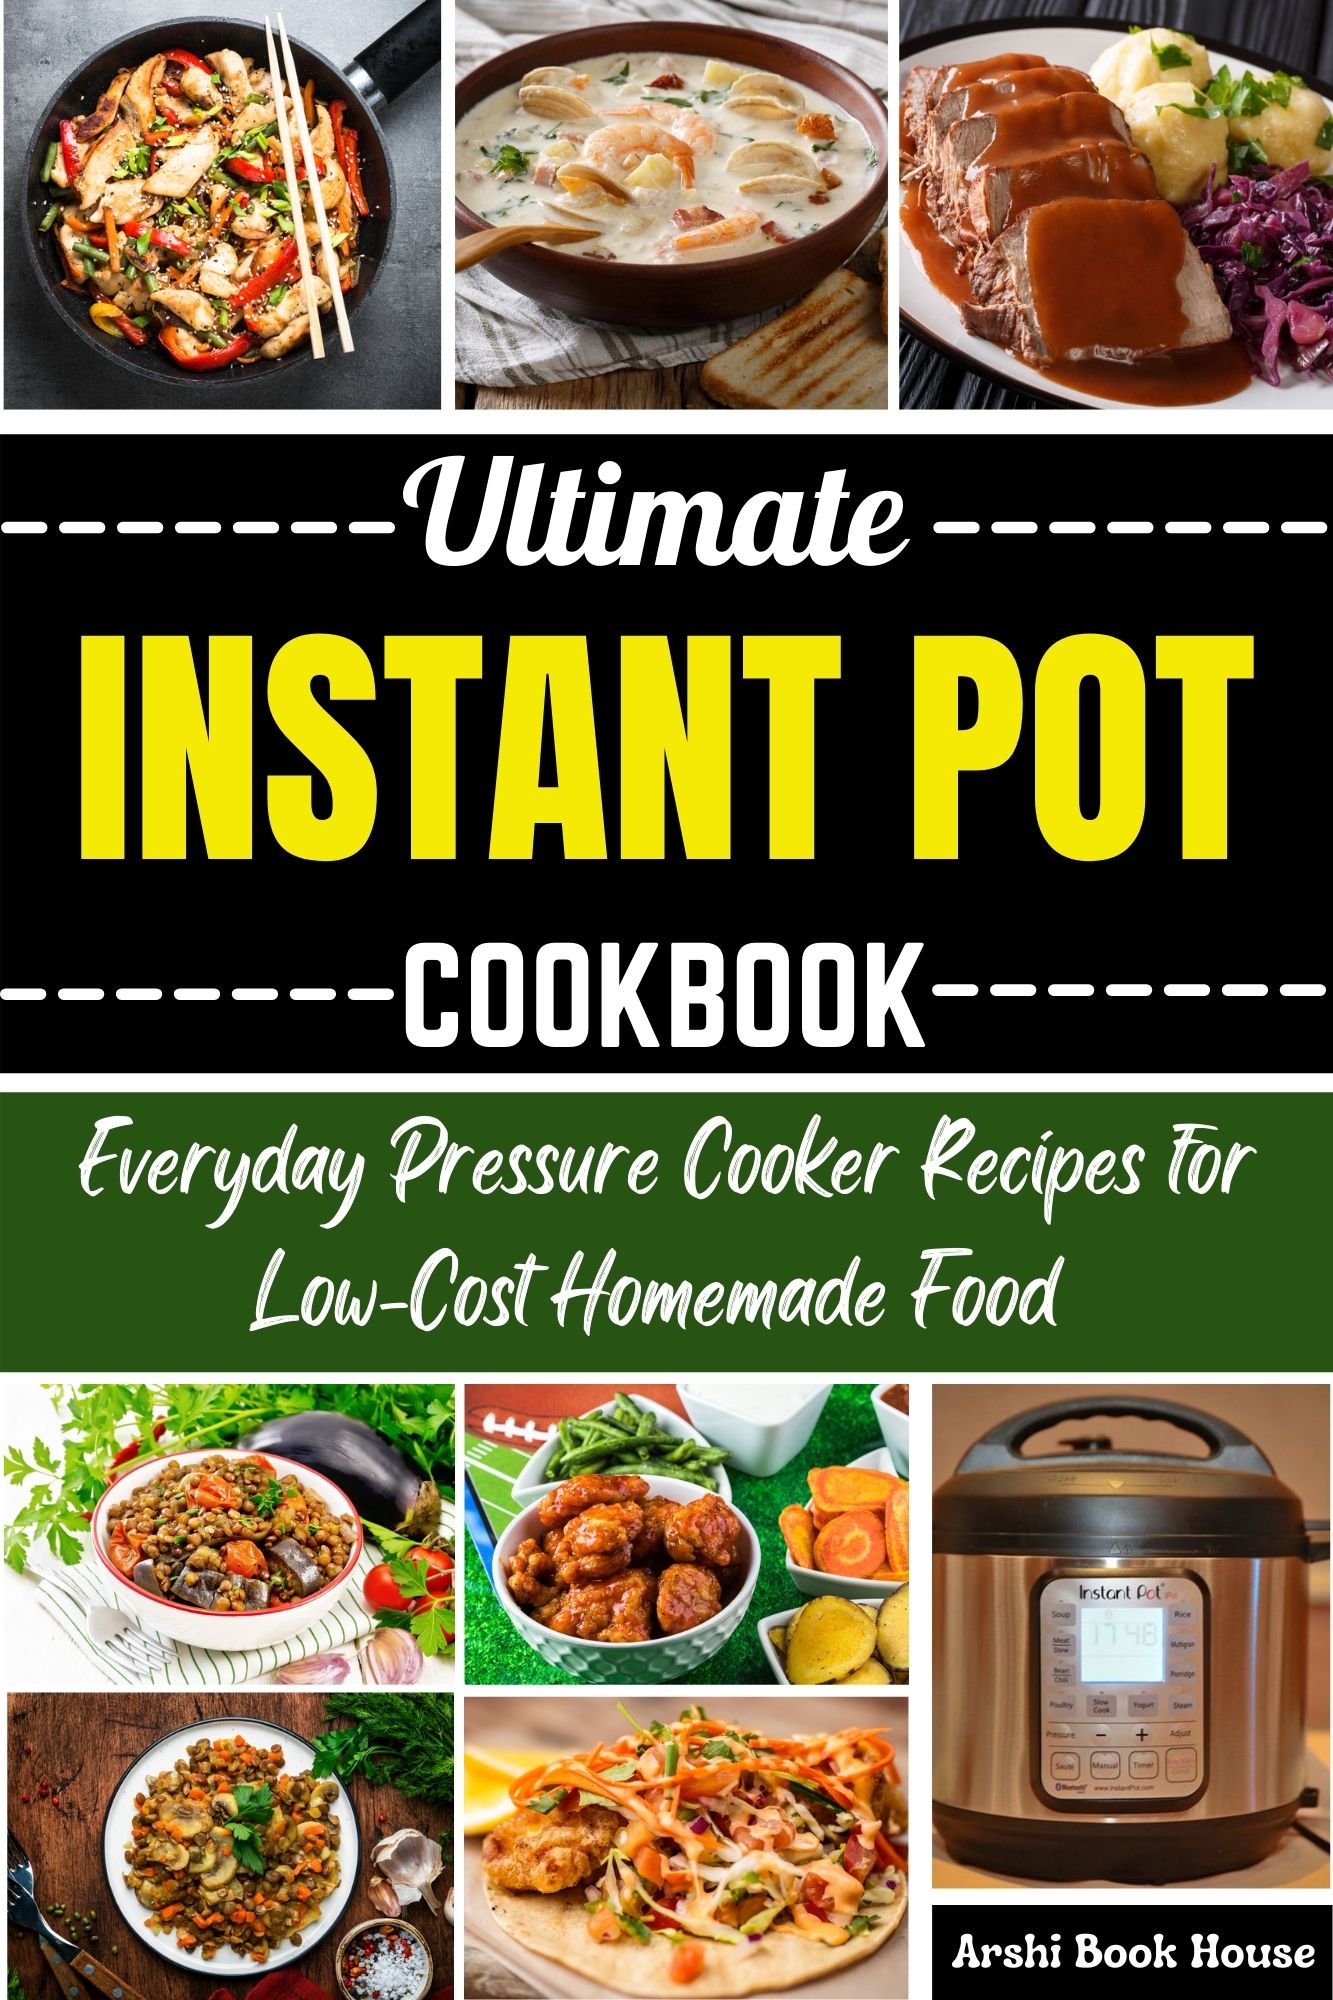 FREE: Ultimate Instant Pot Cookbook by Arshi Book House